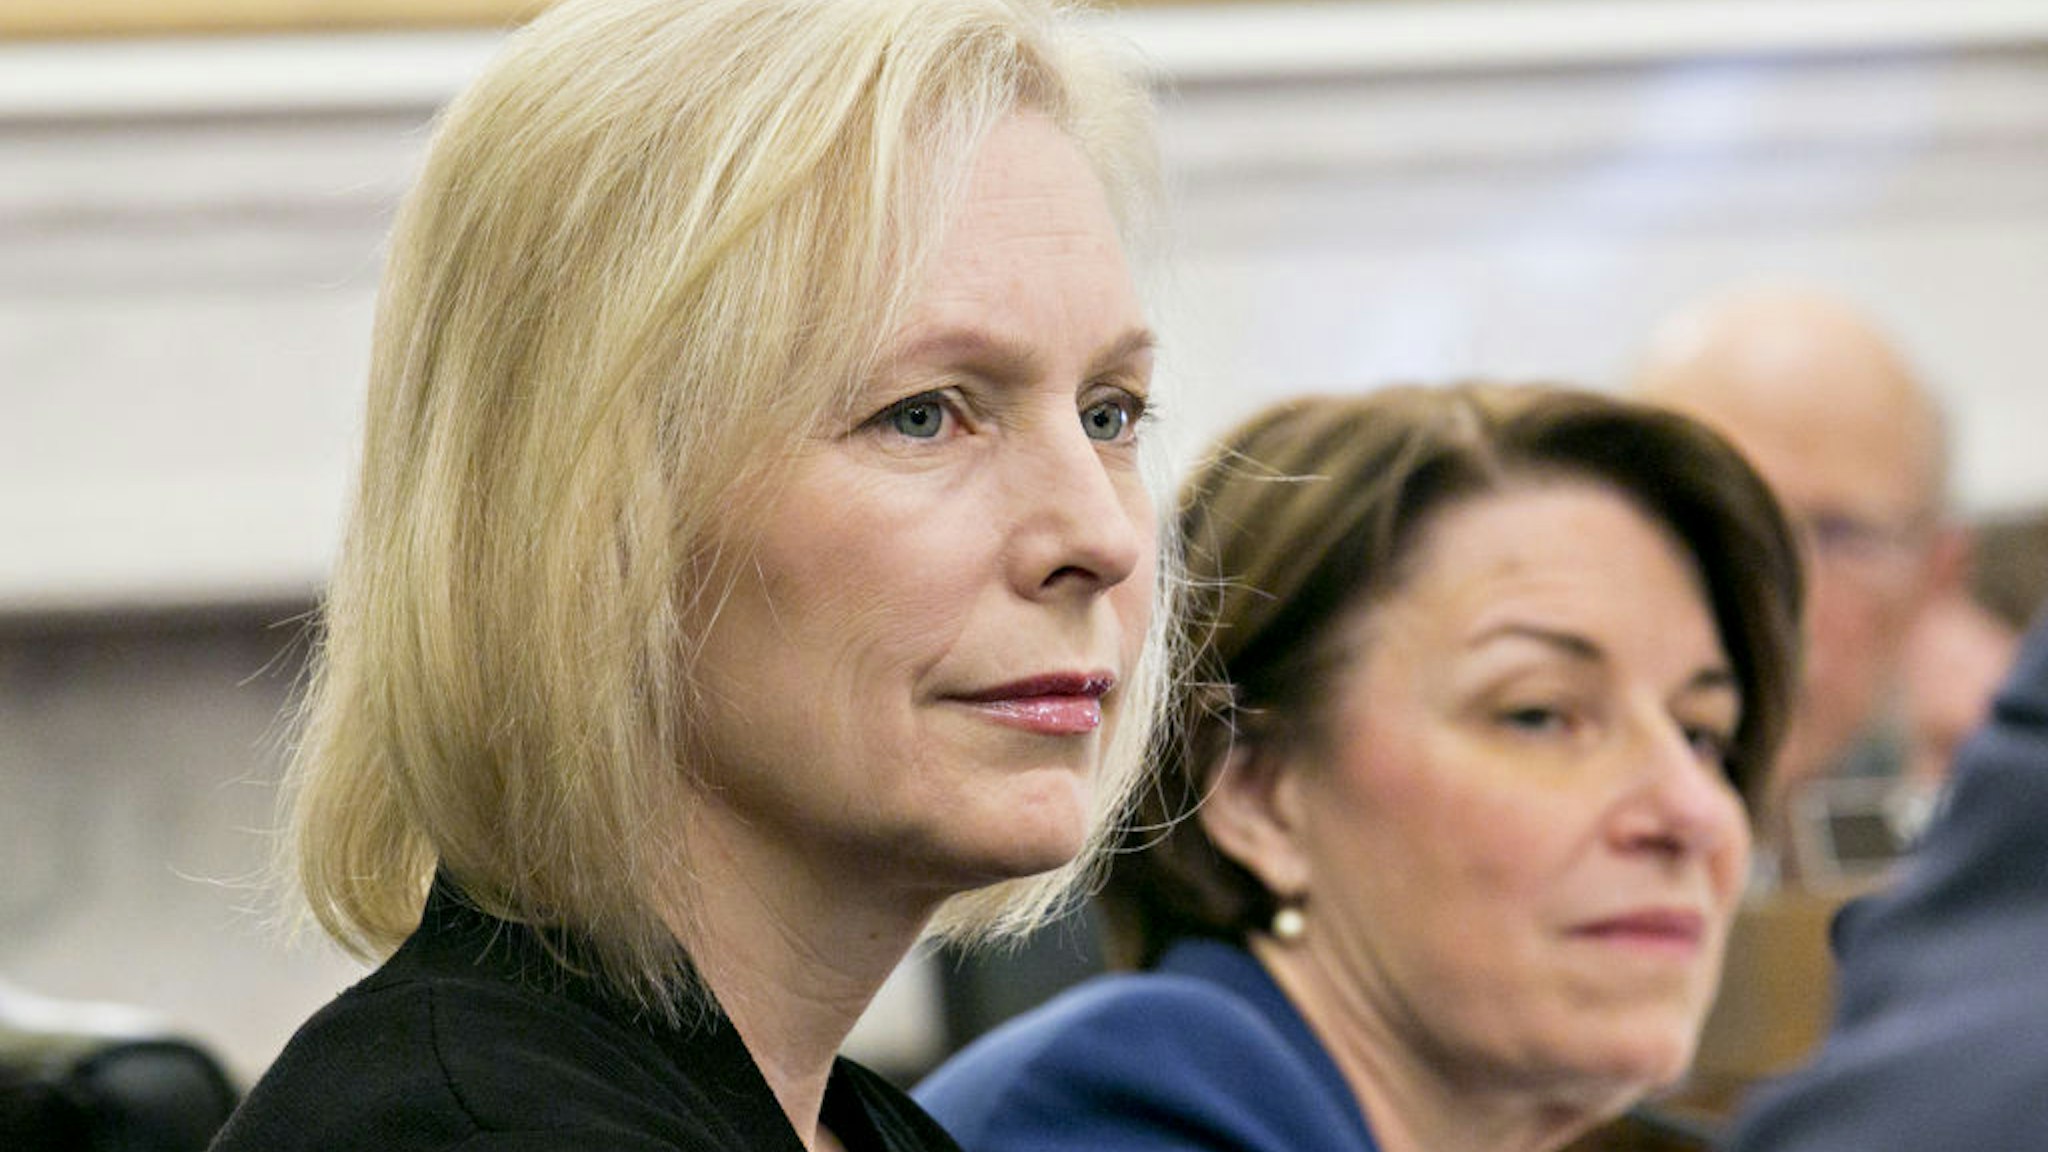 Senator Kristen Gillibrand, a Democrat from New York, left, listens during a Senate Agriculture, Nutrition and Forestry Committee hearing with Sonny Perdue, U.S. secretary of agriculture, not pictured, in Washington, D.C., U.S., on Thursday, Feb. 28, 2019. Perdue told lawmakers in a House hearing yesterday that a final rule to allow widespread sales of those higher blends wont happen by the summer-driving season following delays from the 35-day partial government shutdown. Photographer: Andrew Harrer/Bloomberg